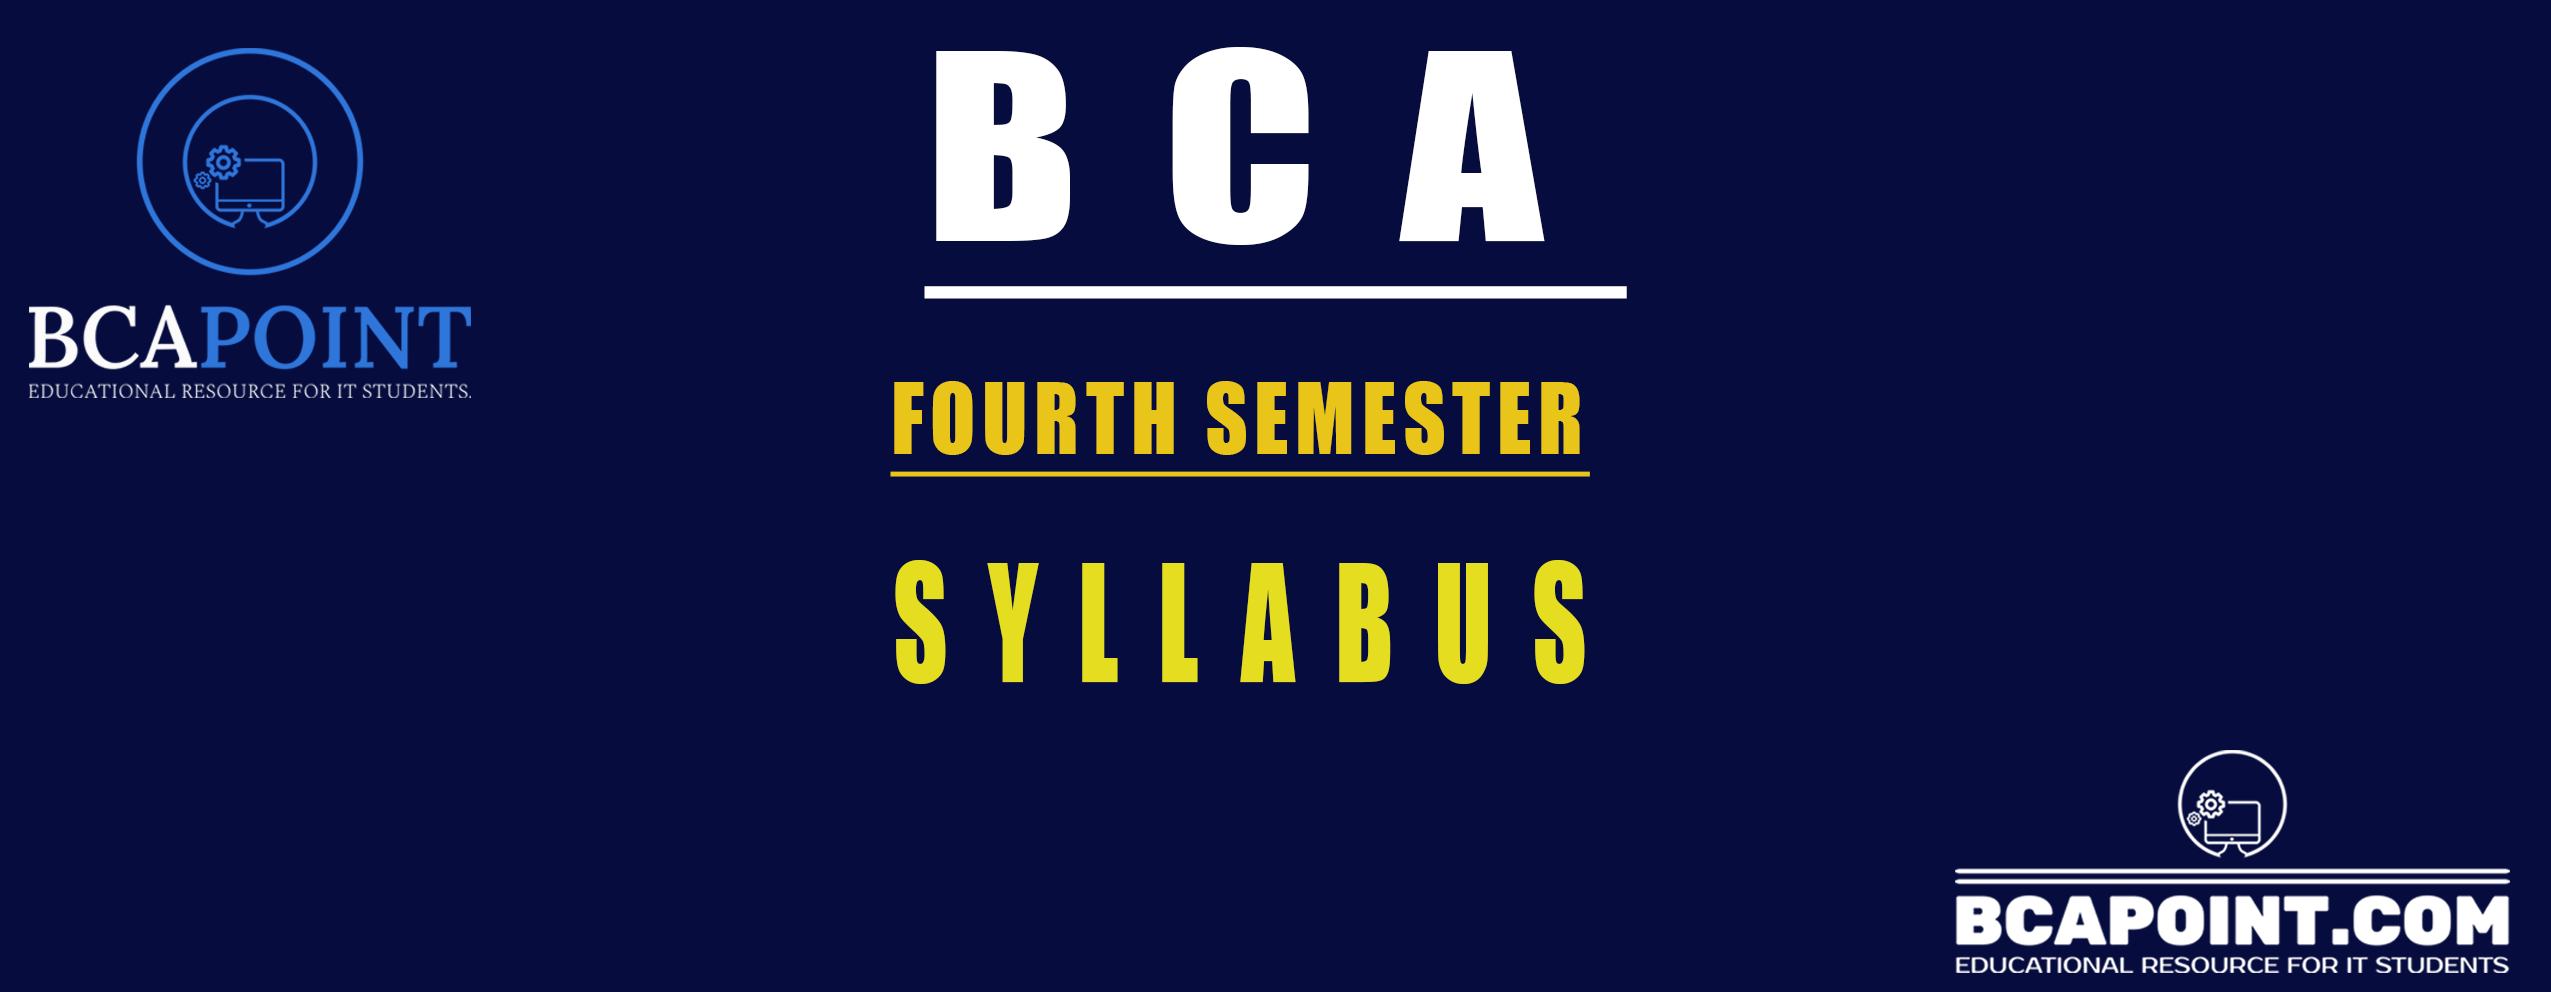 You are currently viewing BCA FOURTH SEMESTER SYLLABUS